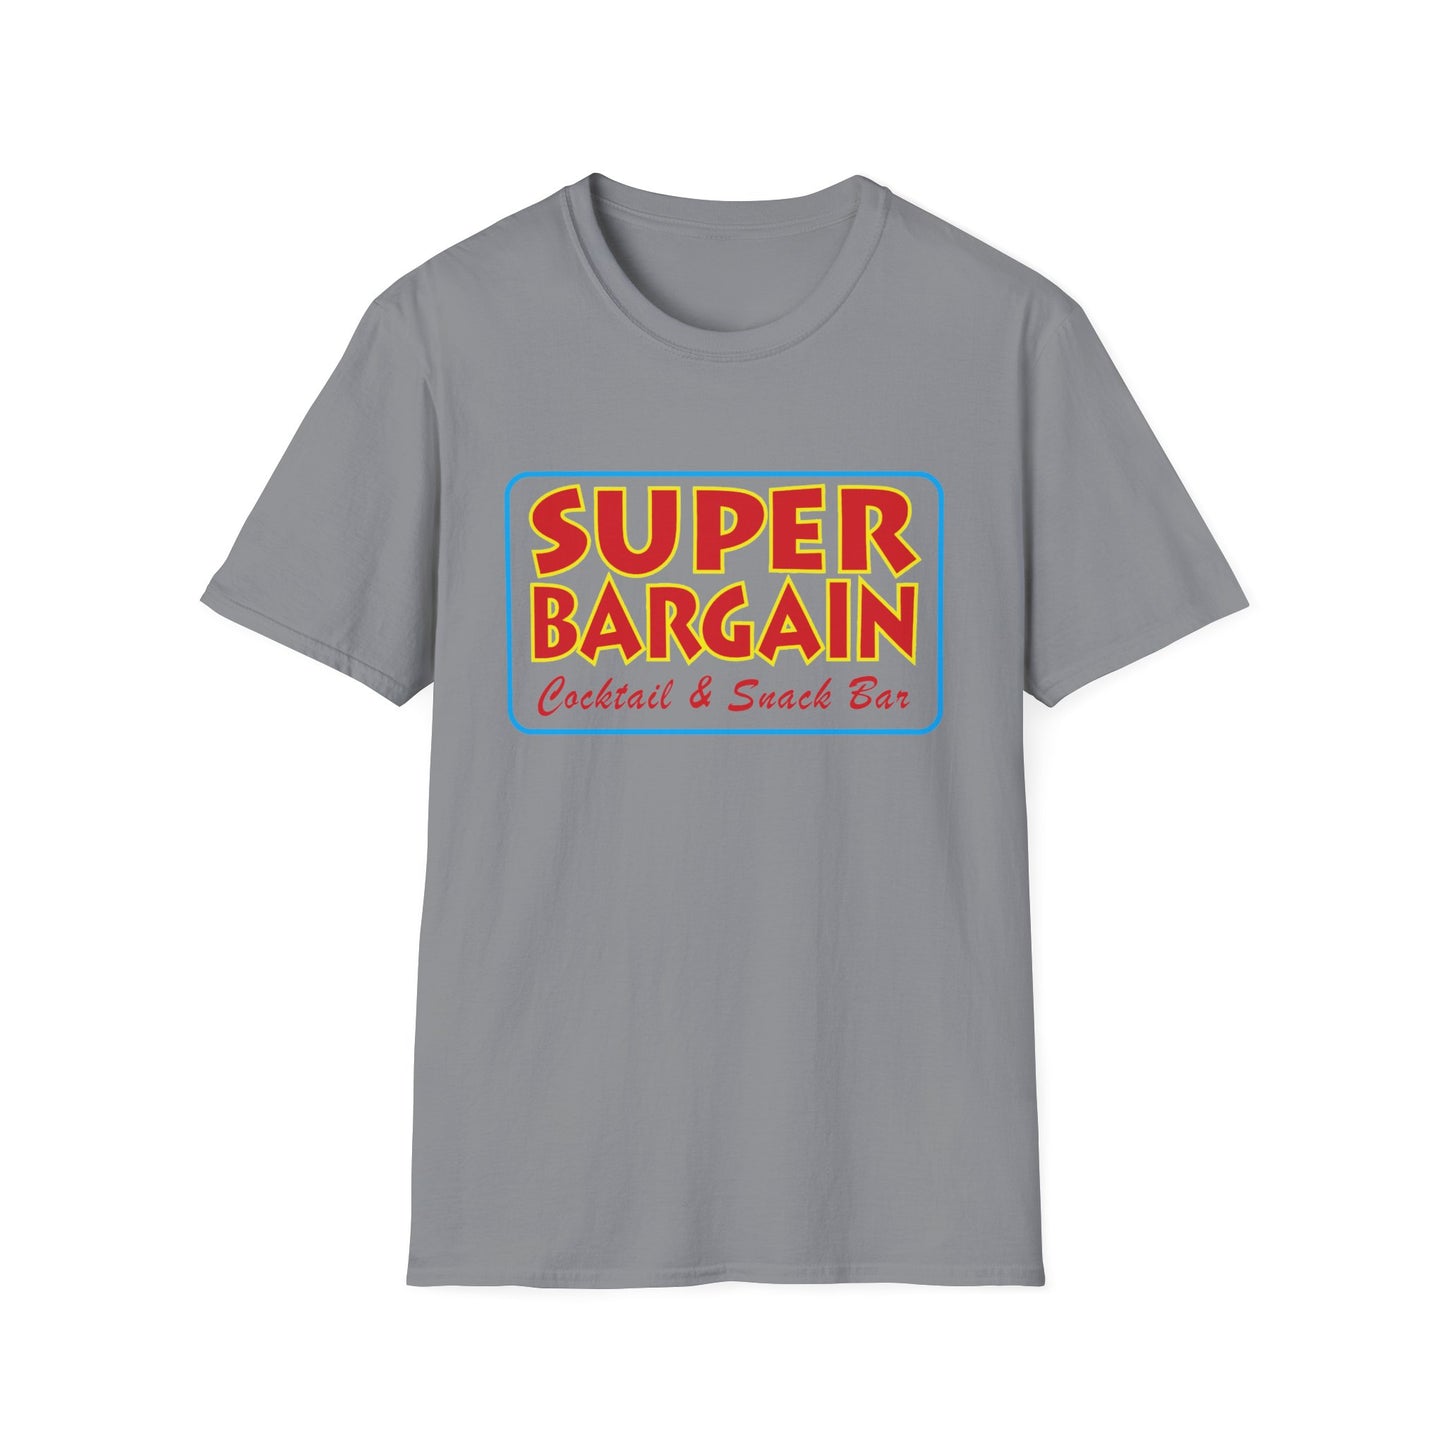 A gray Unisex Softstyle Logo T-Shirt with a colorful "Super Bargain Cocktail & Snack Bar" logo in retro style, featuring bold red, blue, and yellow colors on the chest area, inspired by Toronto's Cabbagetown. (Printify)